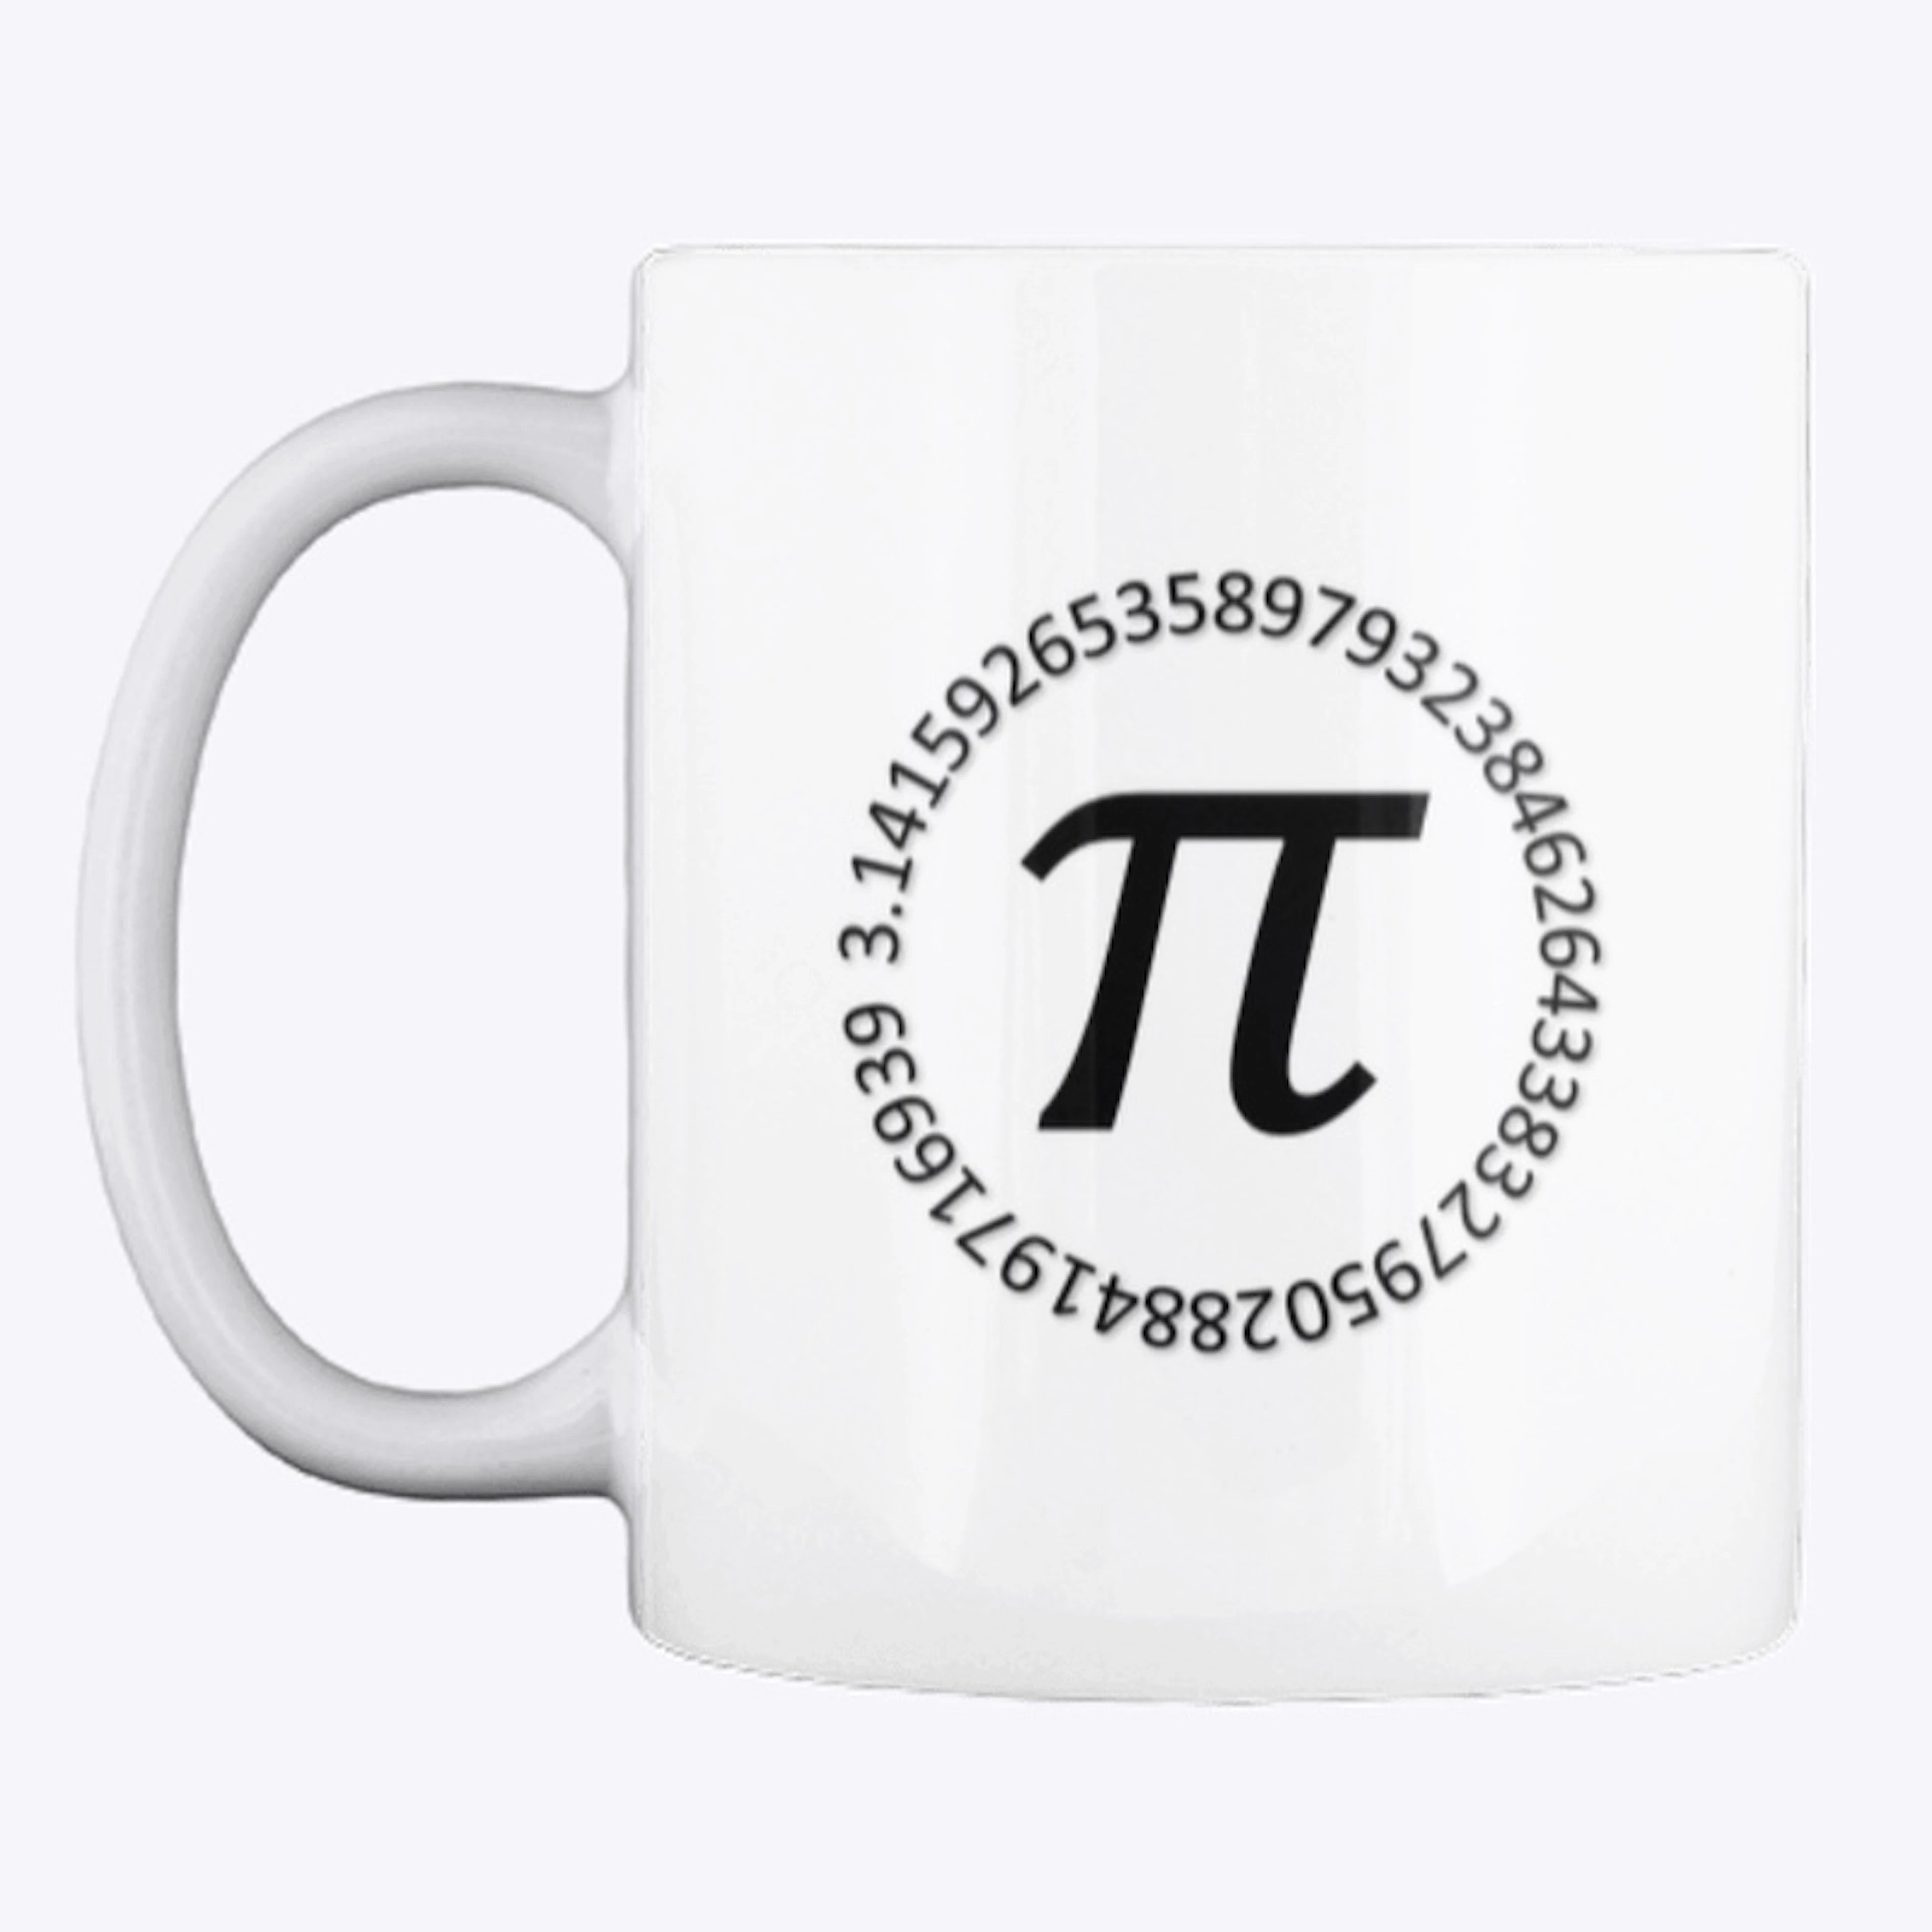 The digits of Pi